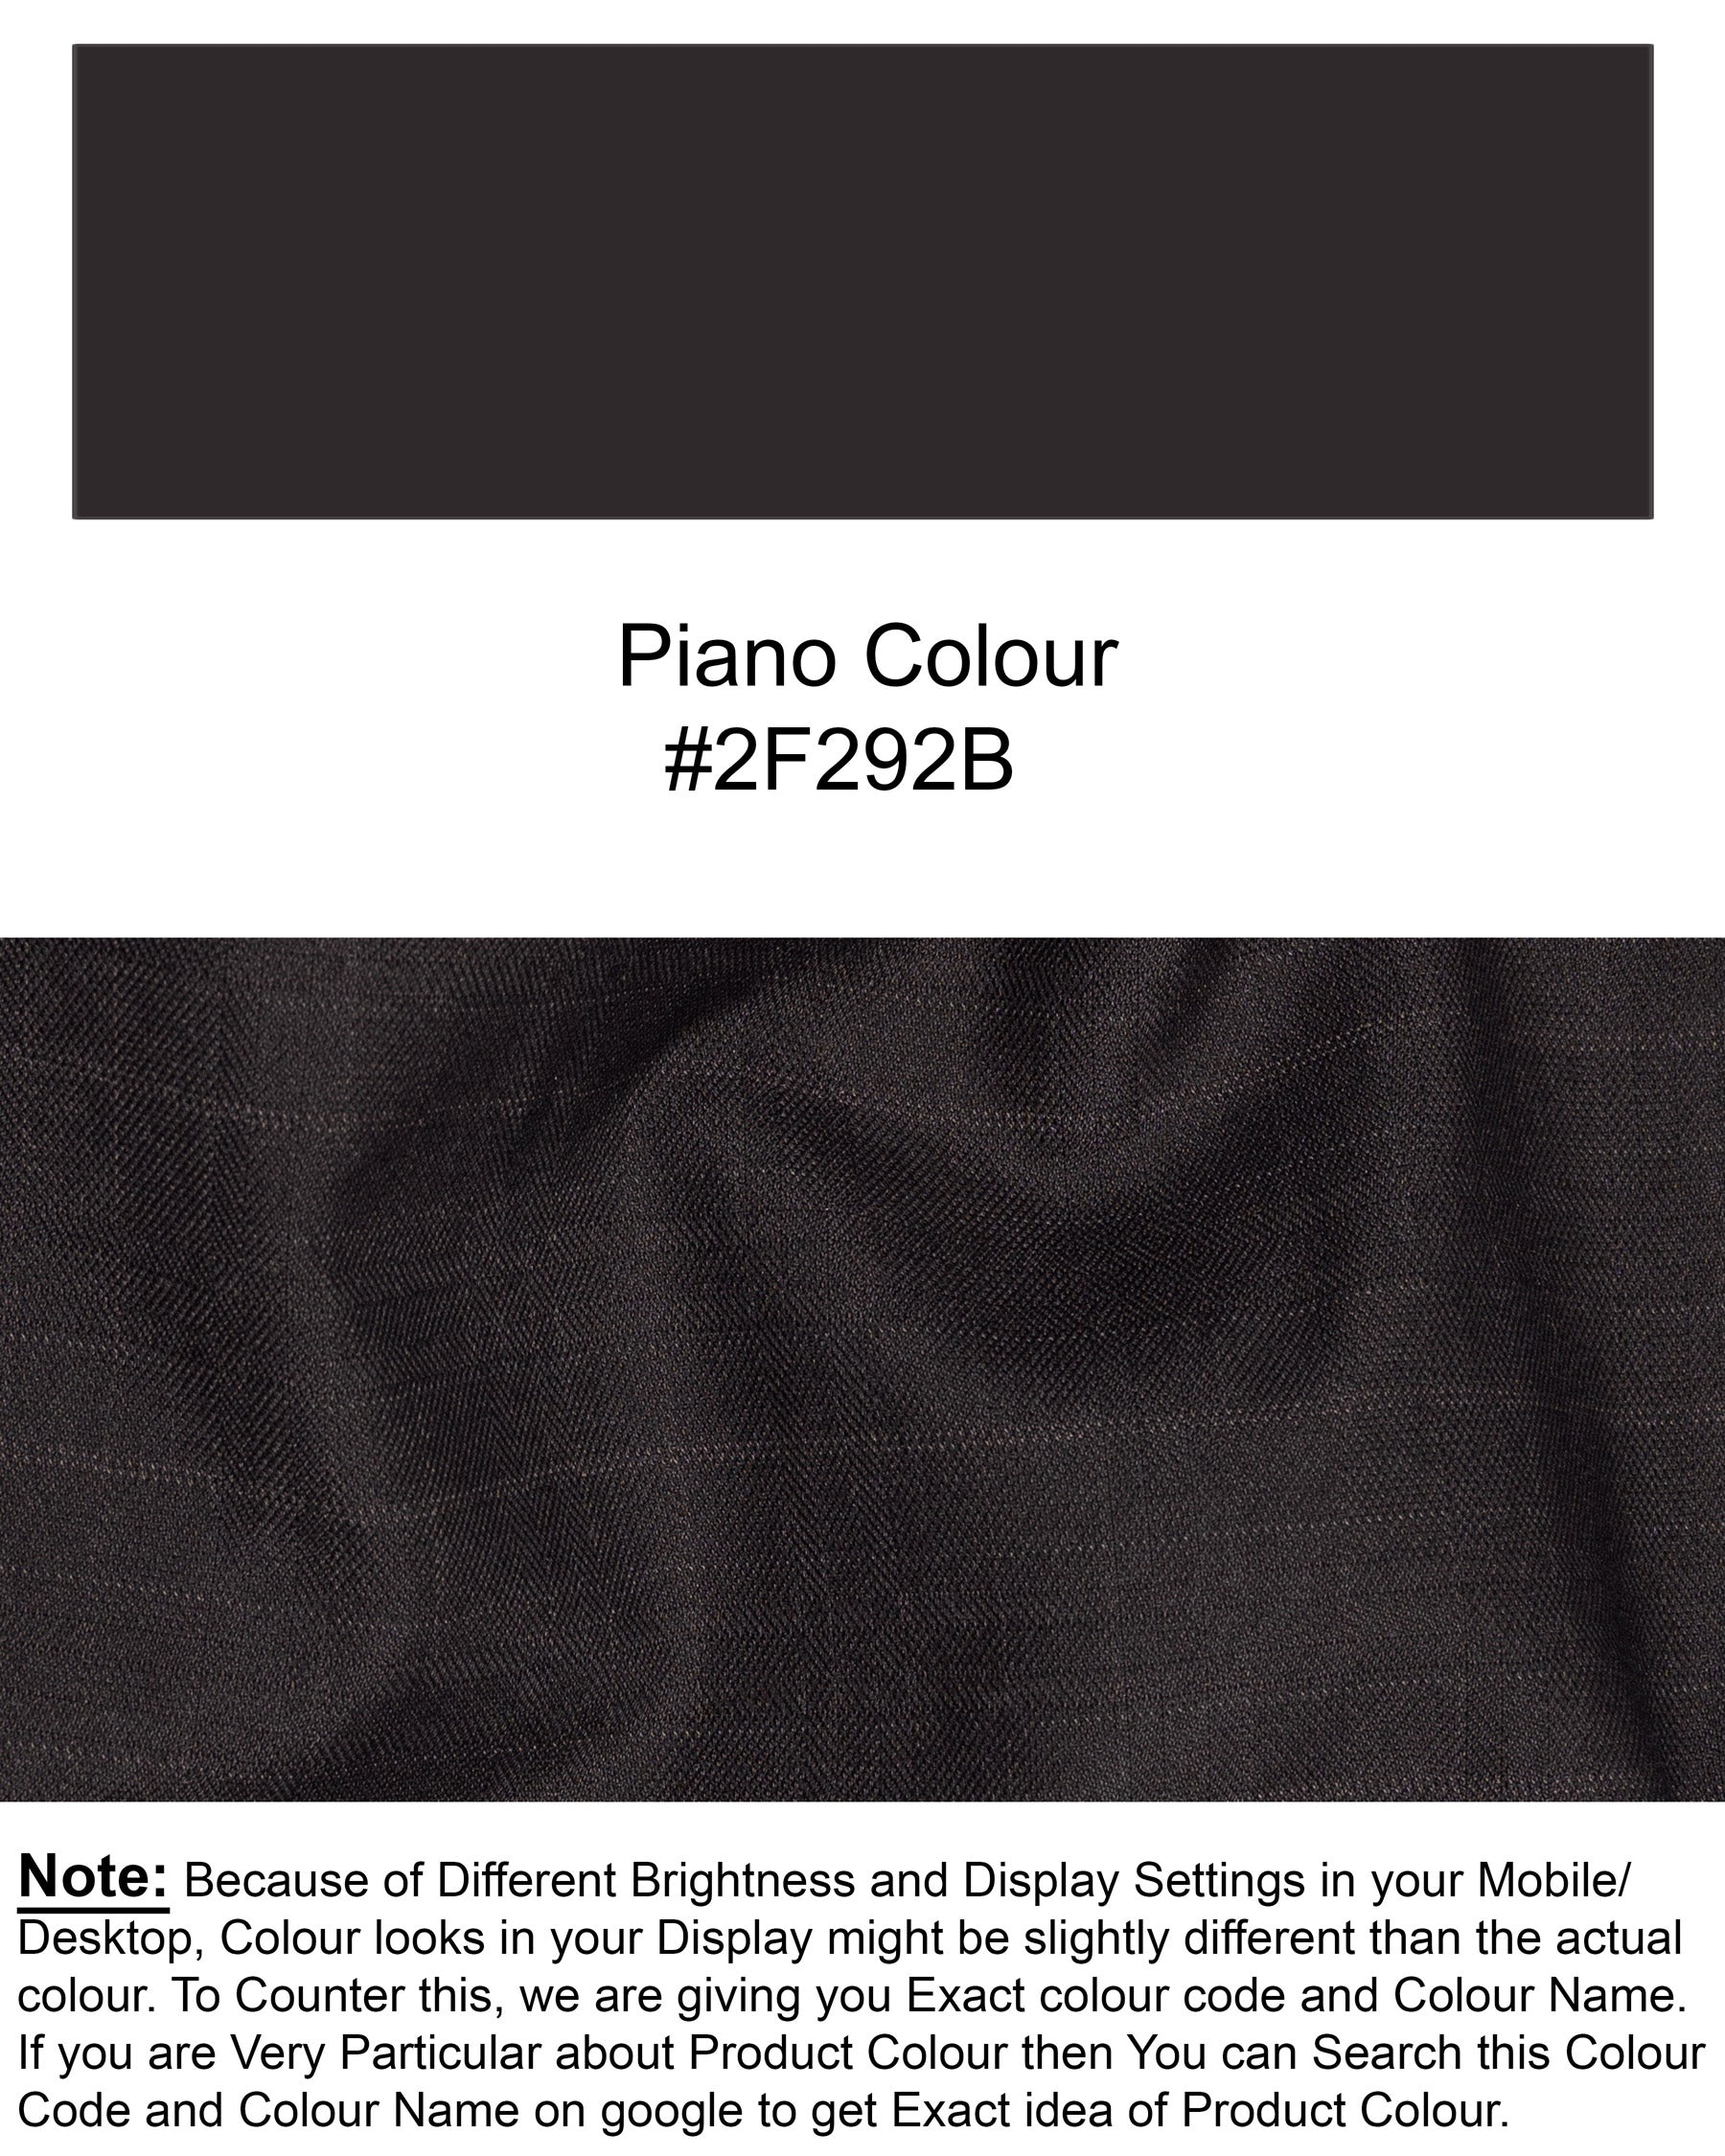 Piano Brown Plaid Double-BreaBled Premium Wool Rich Blazer BL1533-DB-36, BL1533-DB-38, BL1533-DB-40, BL1533-DB-42, BL1533-DB-44, BL1533-DB-46, BL1533-DB-48, BL1533-DB-50, BL1533-DB-52, BL1533-DB-54, BL1533-DB-56, BL1533-DB-58, BL1533-DB-60